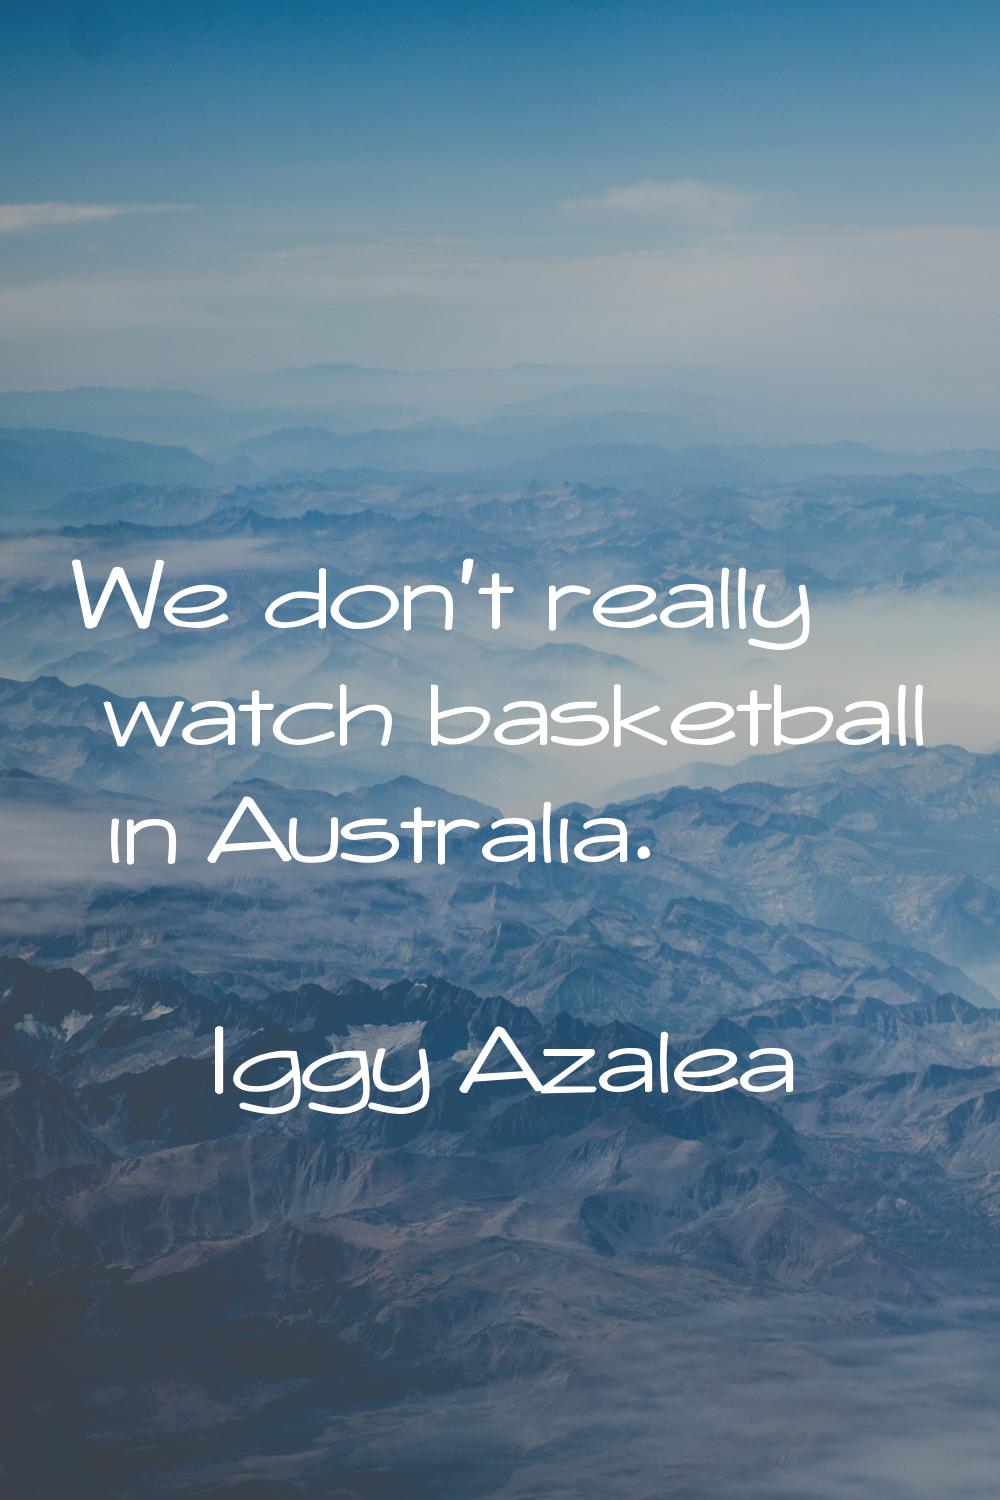 We don't really watch basketball in Australia.